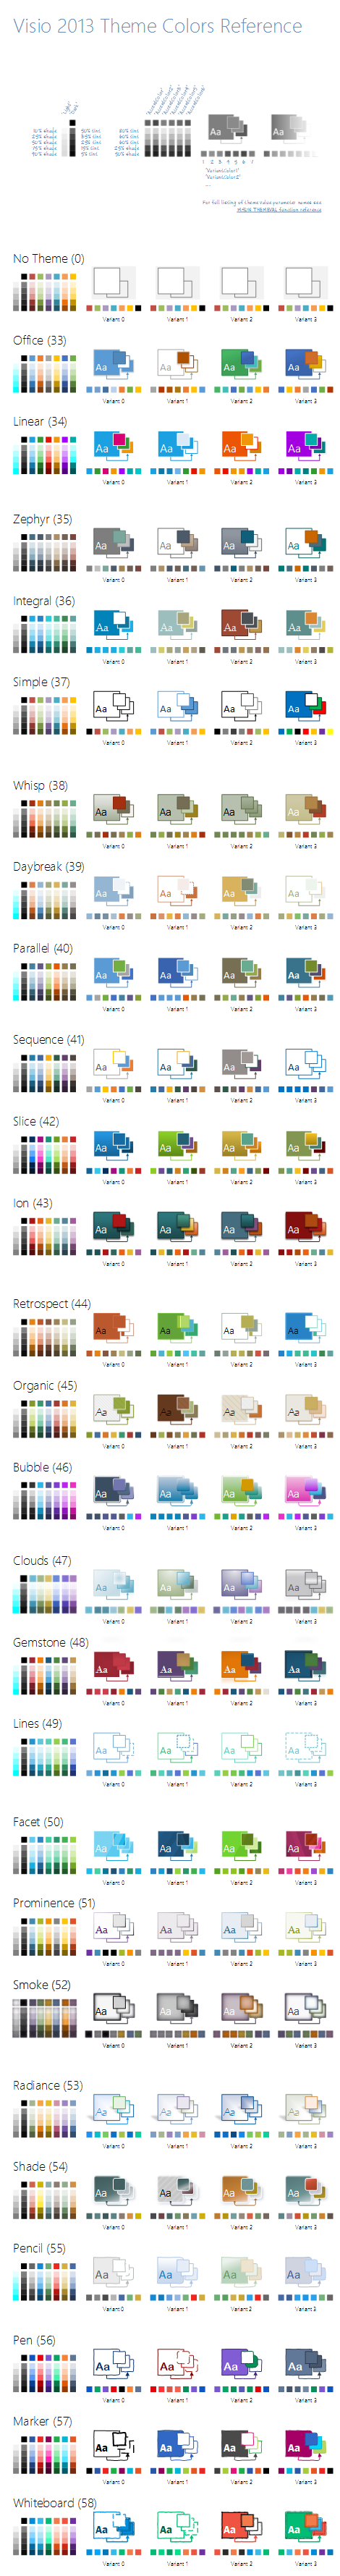 Visio2013ThemeColorsReference